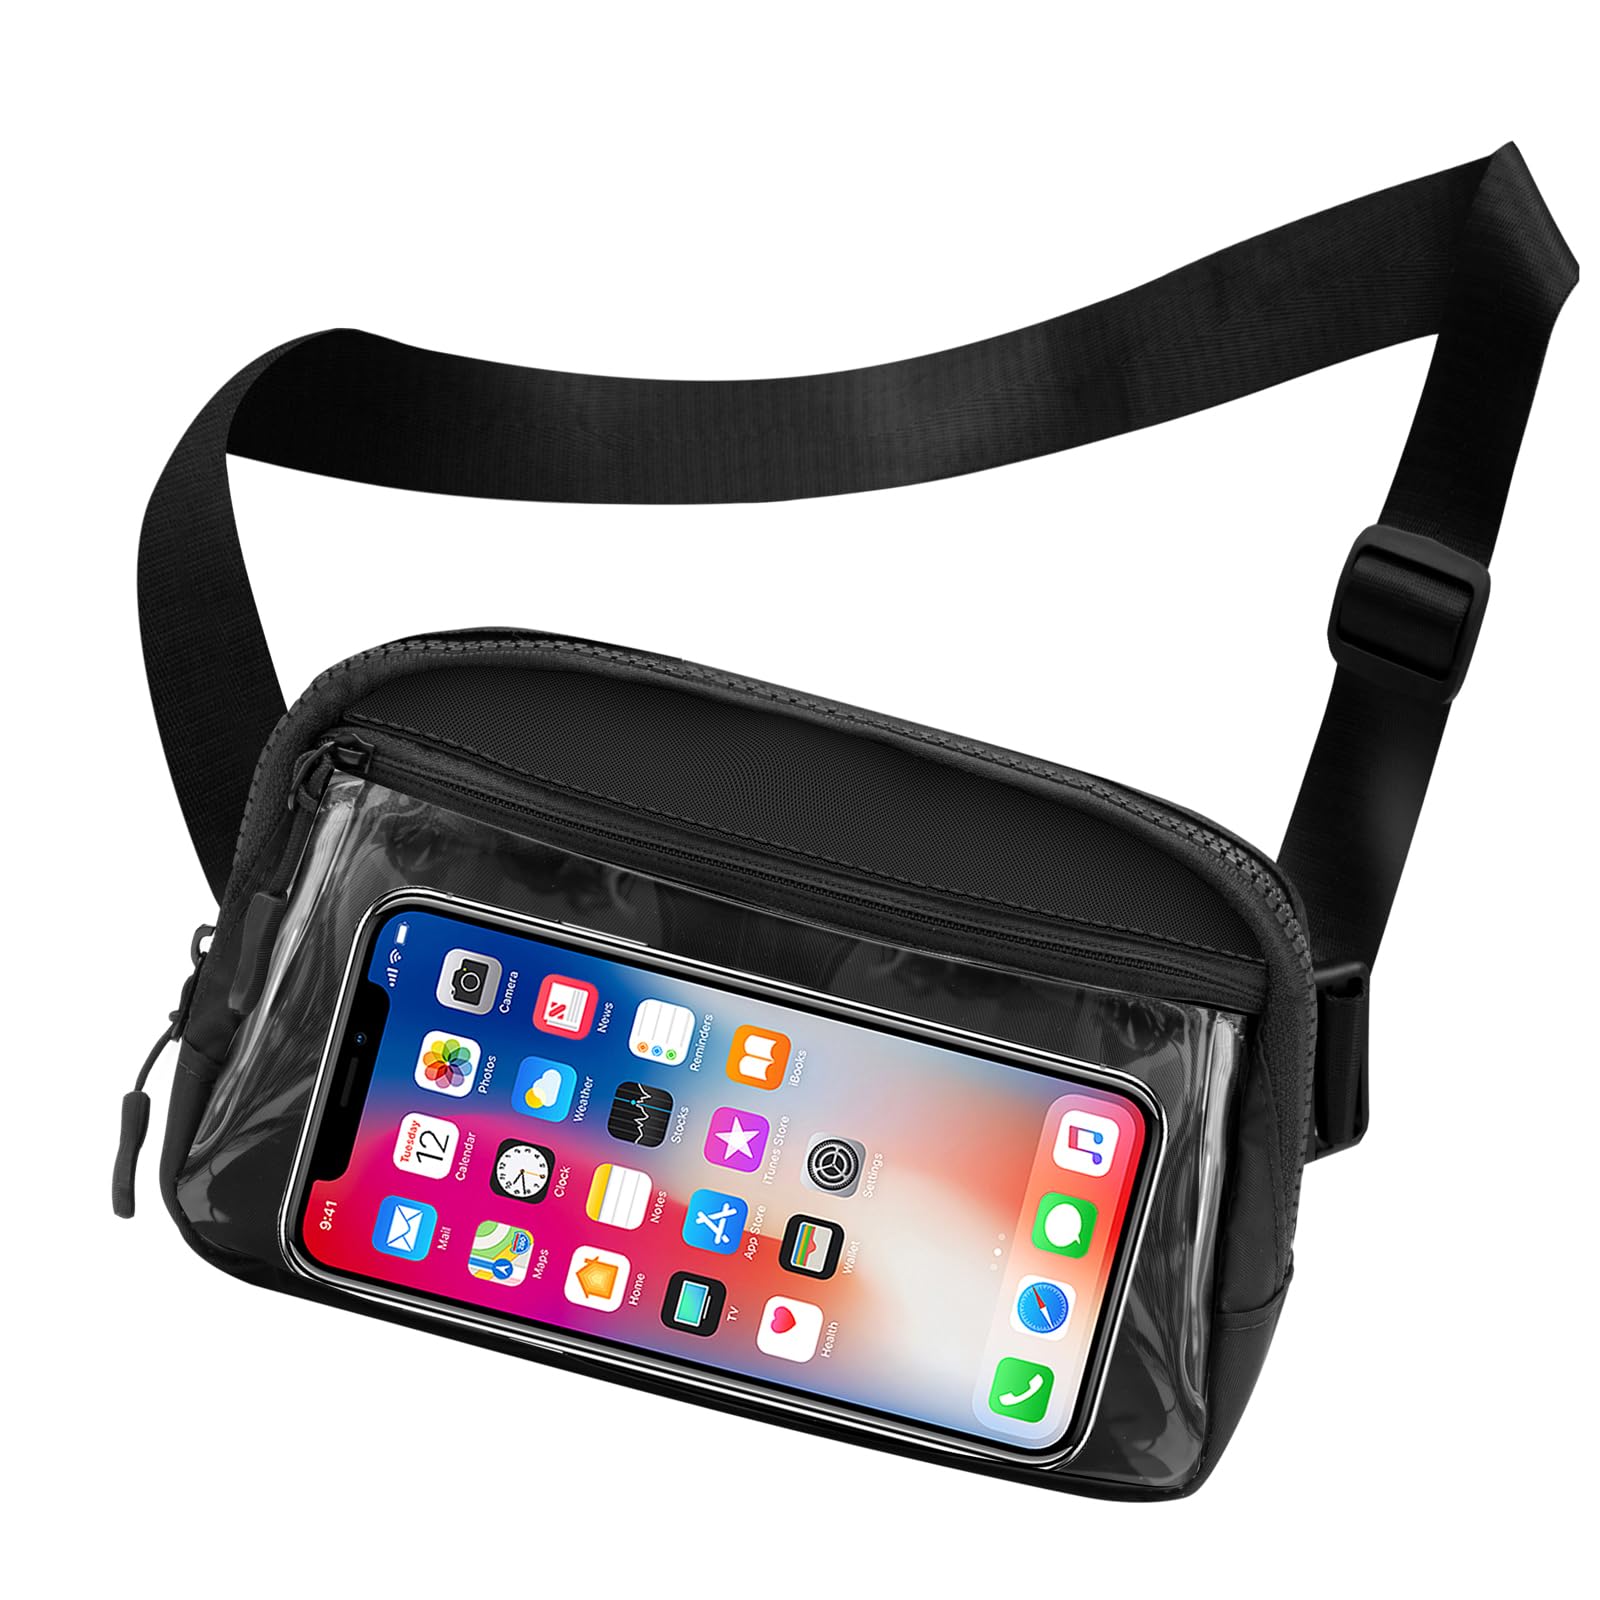 TOSTOK Fanny Packs for Women Men crossbody bags Touch Screen Running belts for phone Fashion Waist Packs with Adjustable Strap